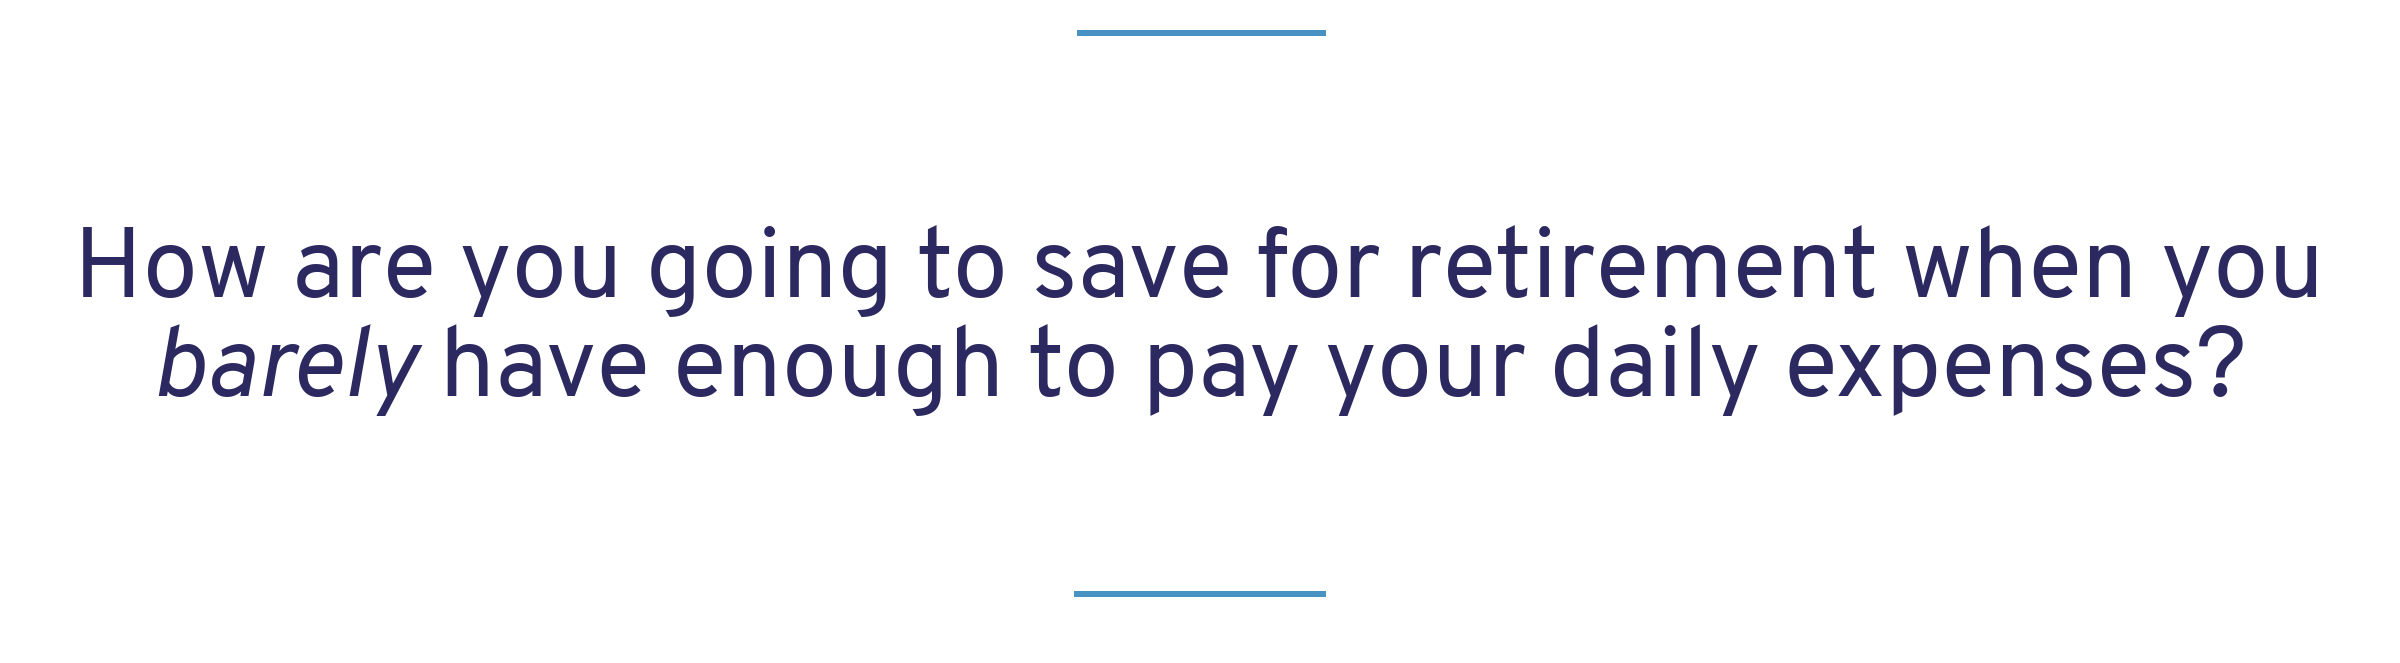 how to save for retirement